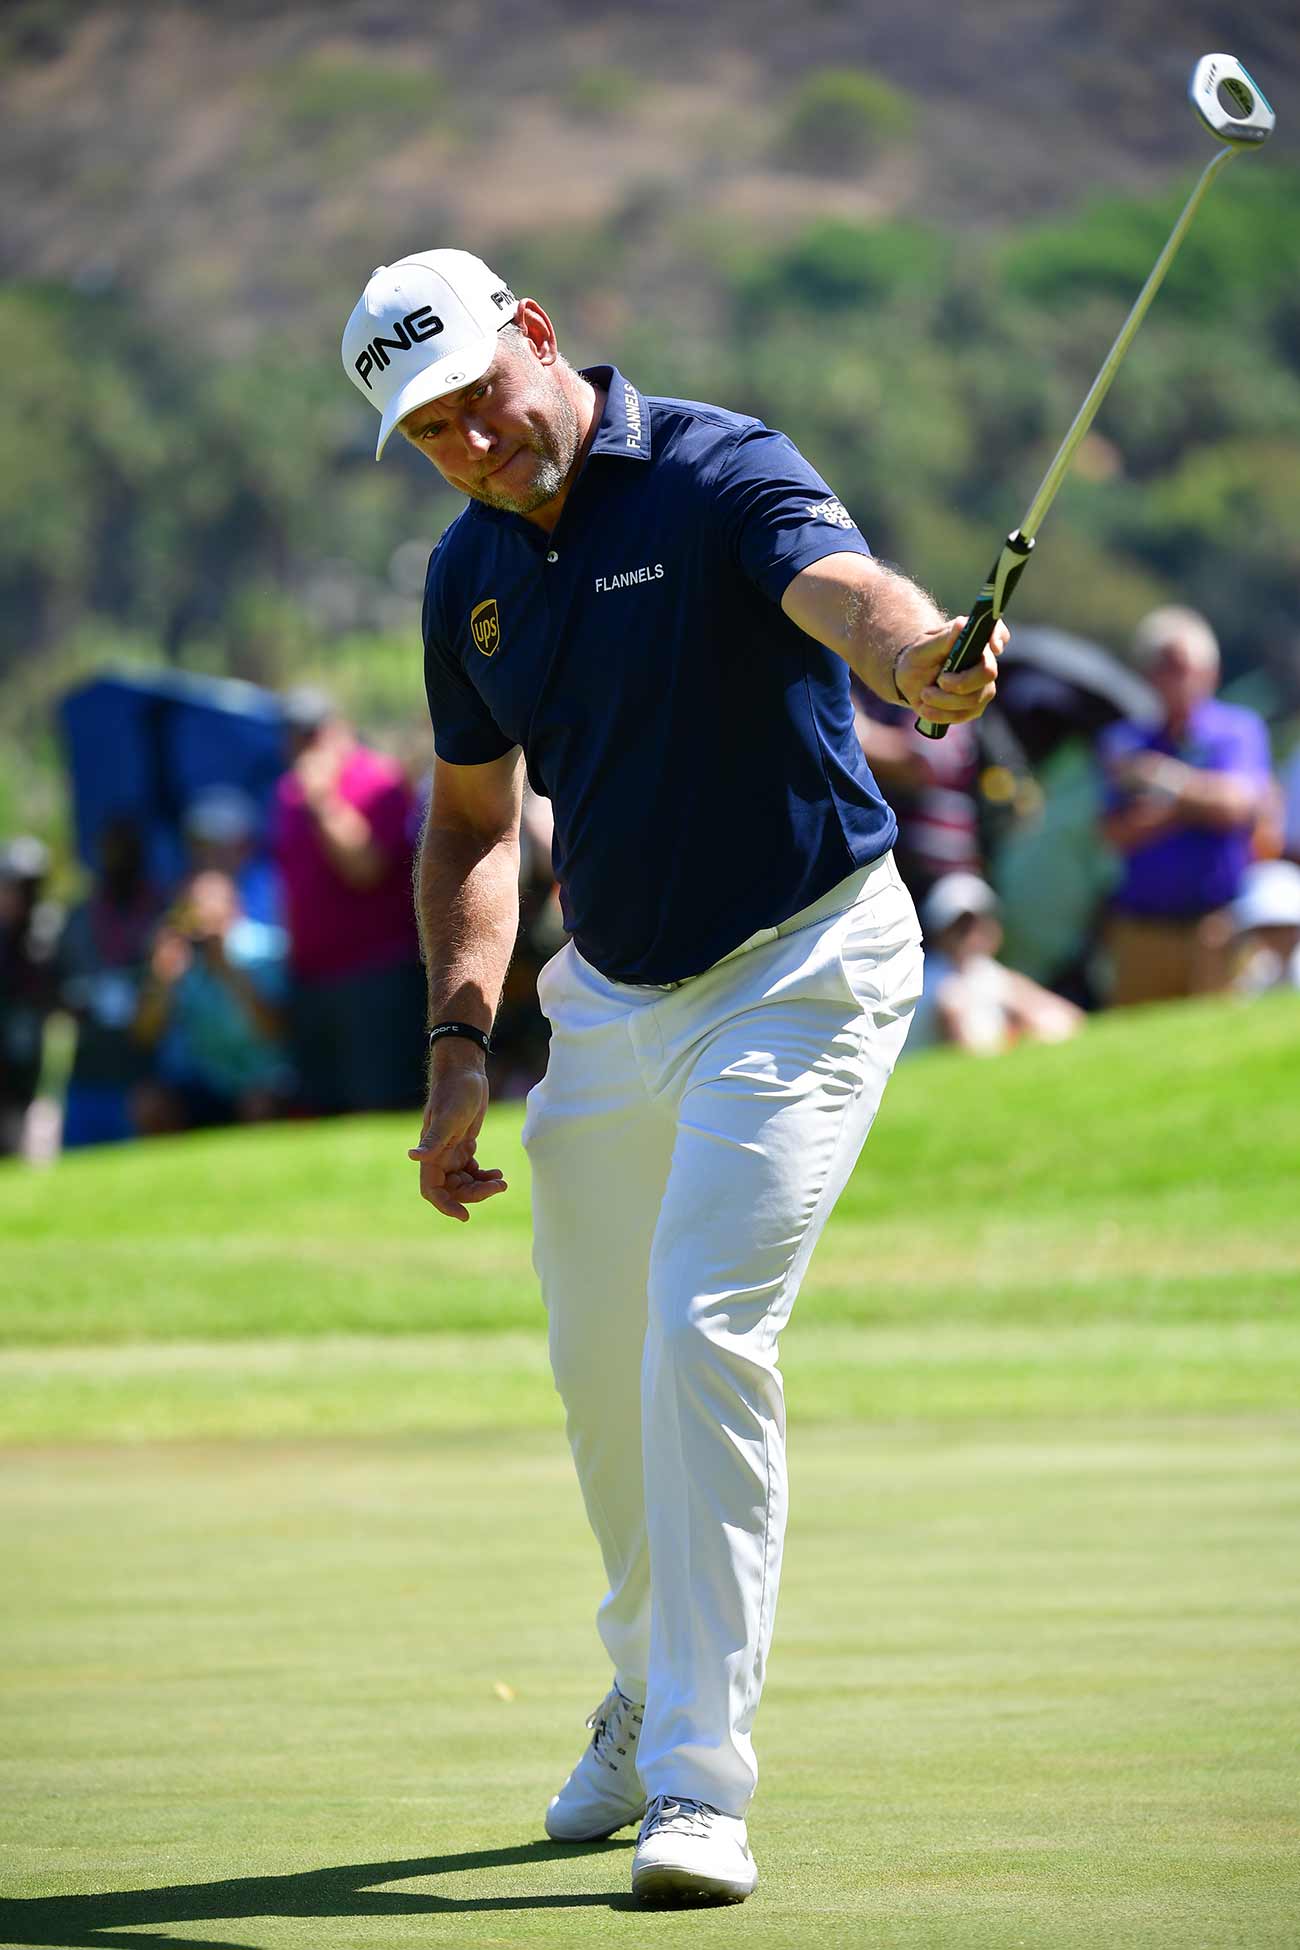 Lee Westwood holds up his putter during a stellar final round on Sunday.